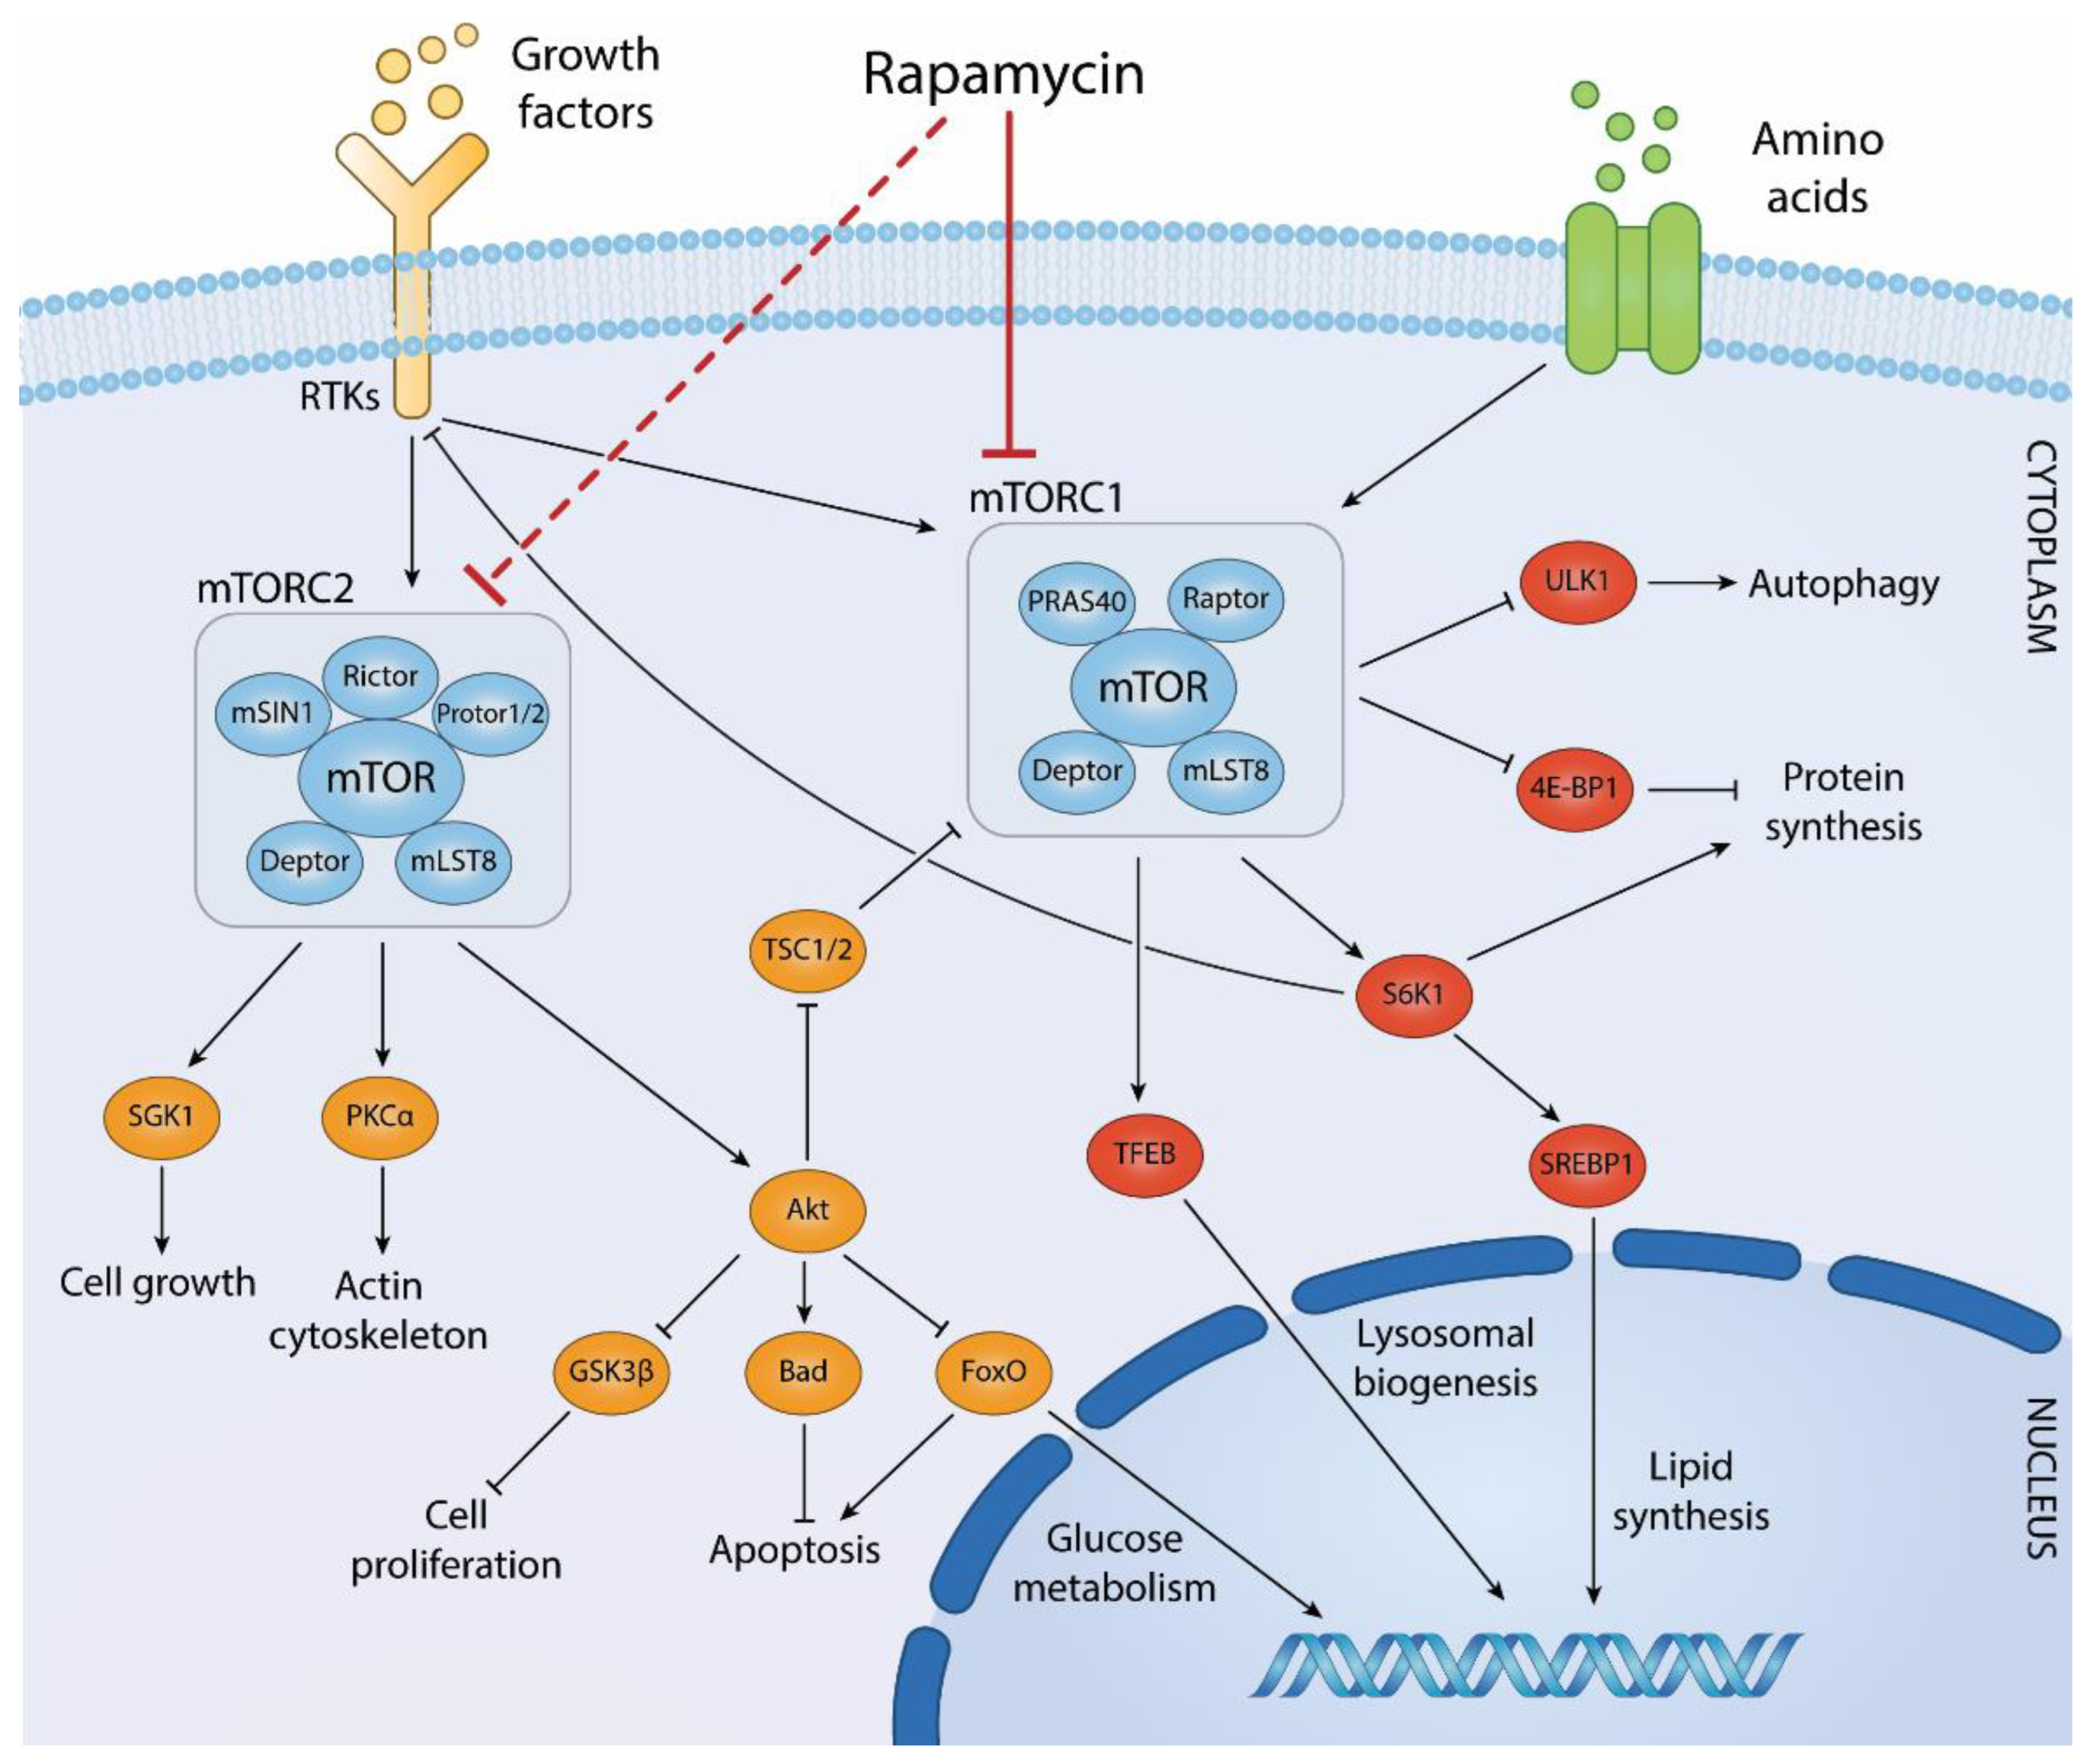 Figure 4 Biological processes regulated by mTOR complexes and downstream effector pathways. (Centonze, 2022)